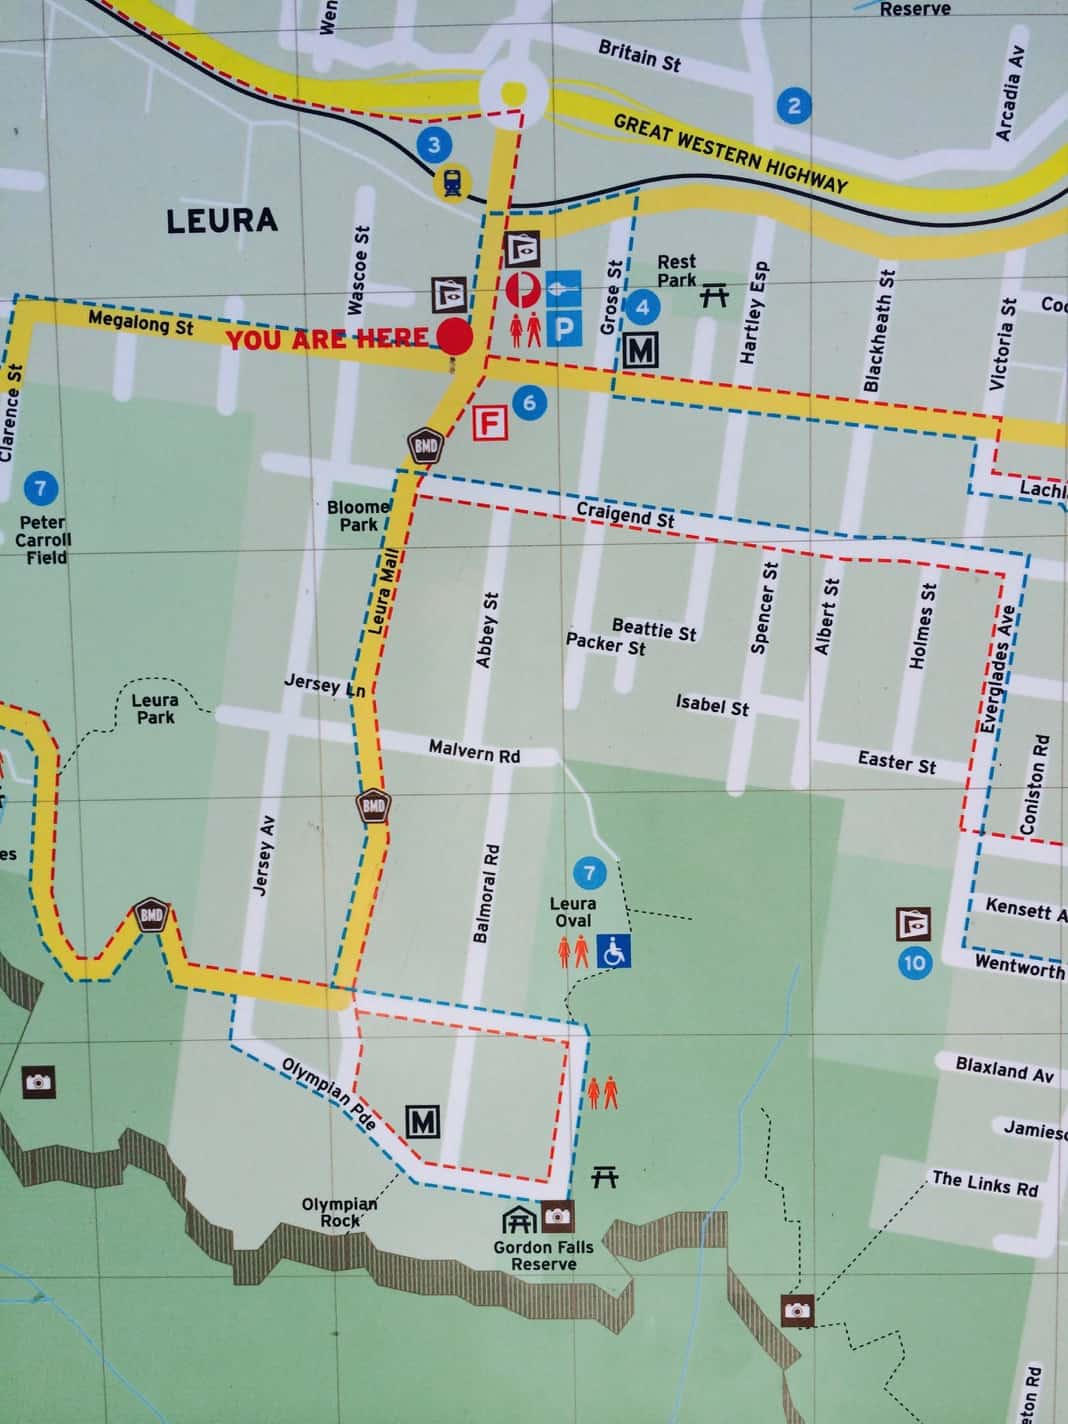 Street Map of Leura showing directions to Olympian Rock